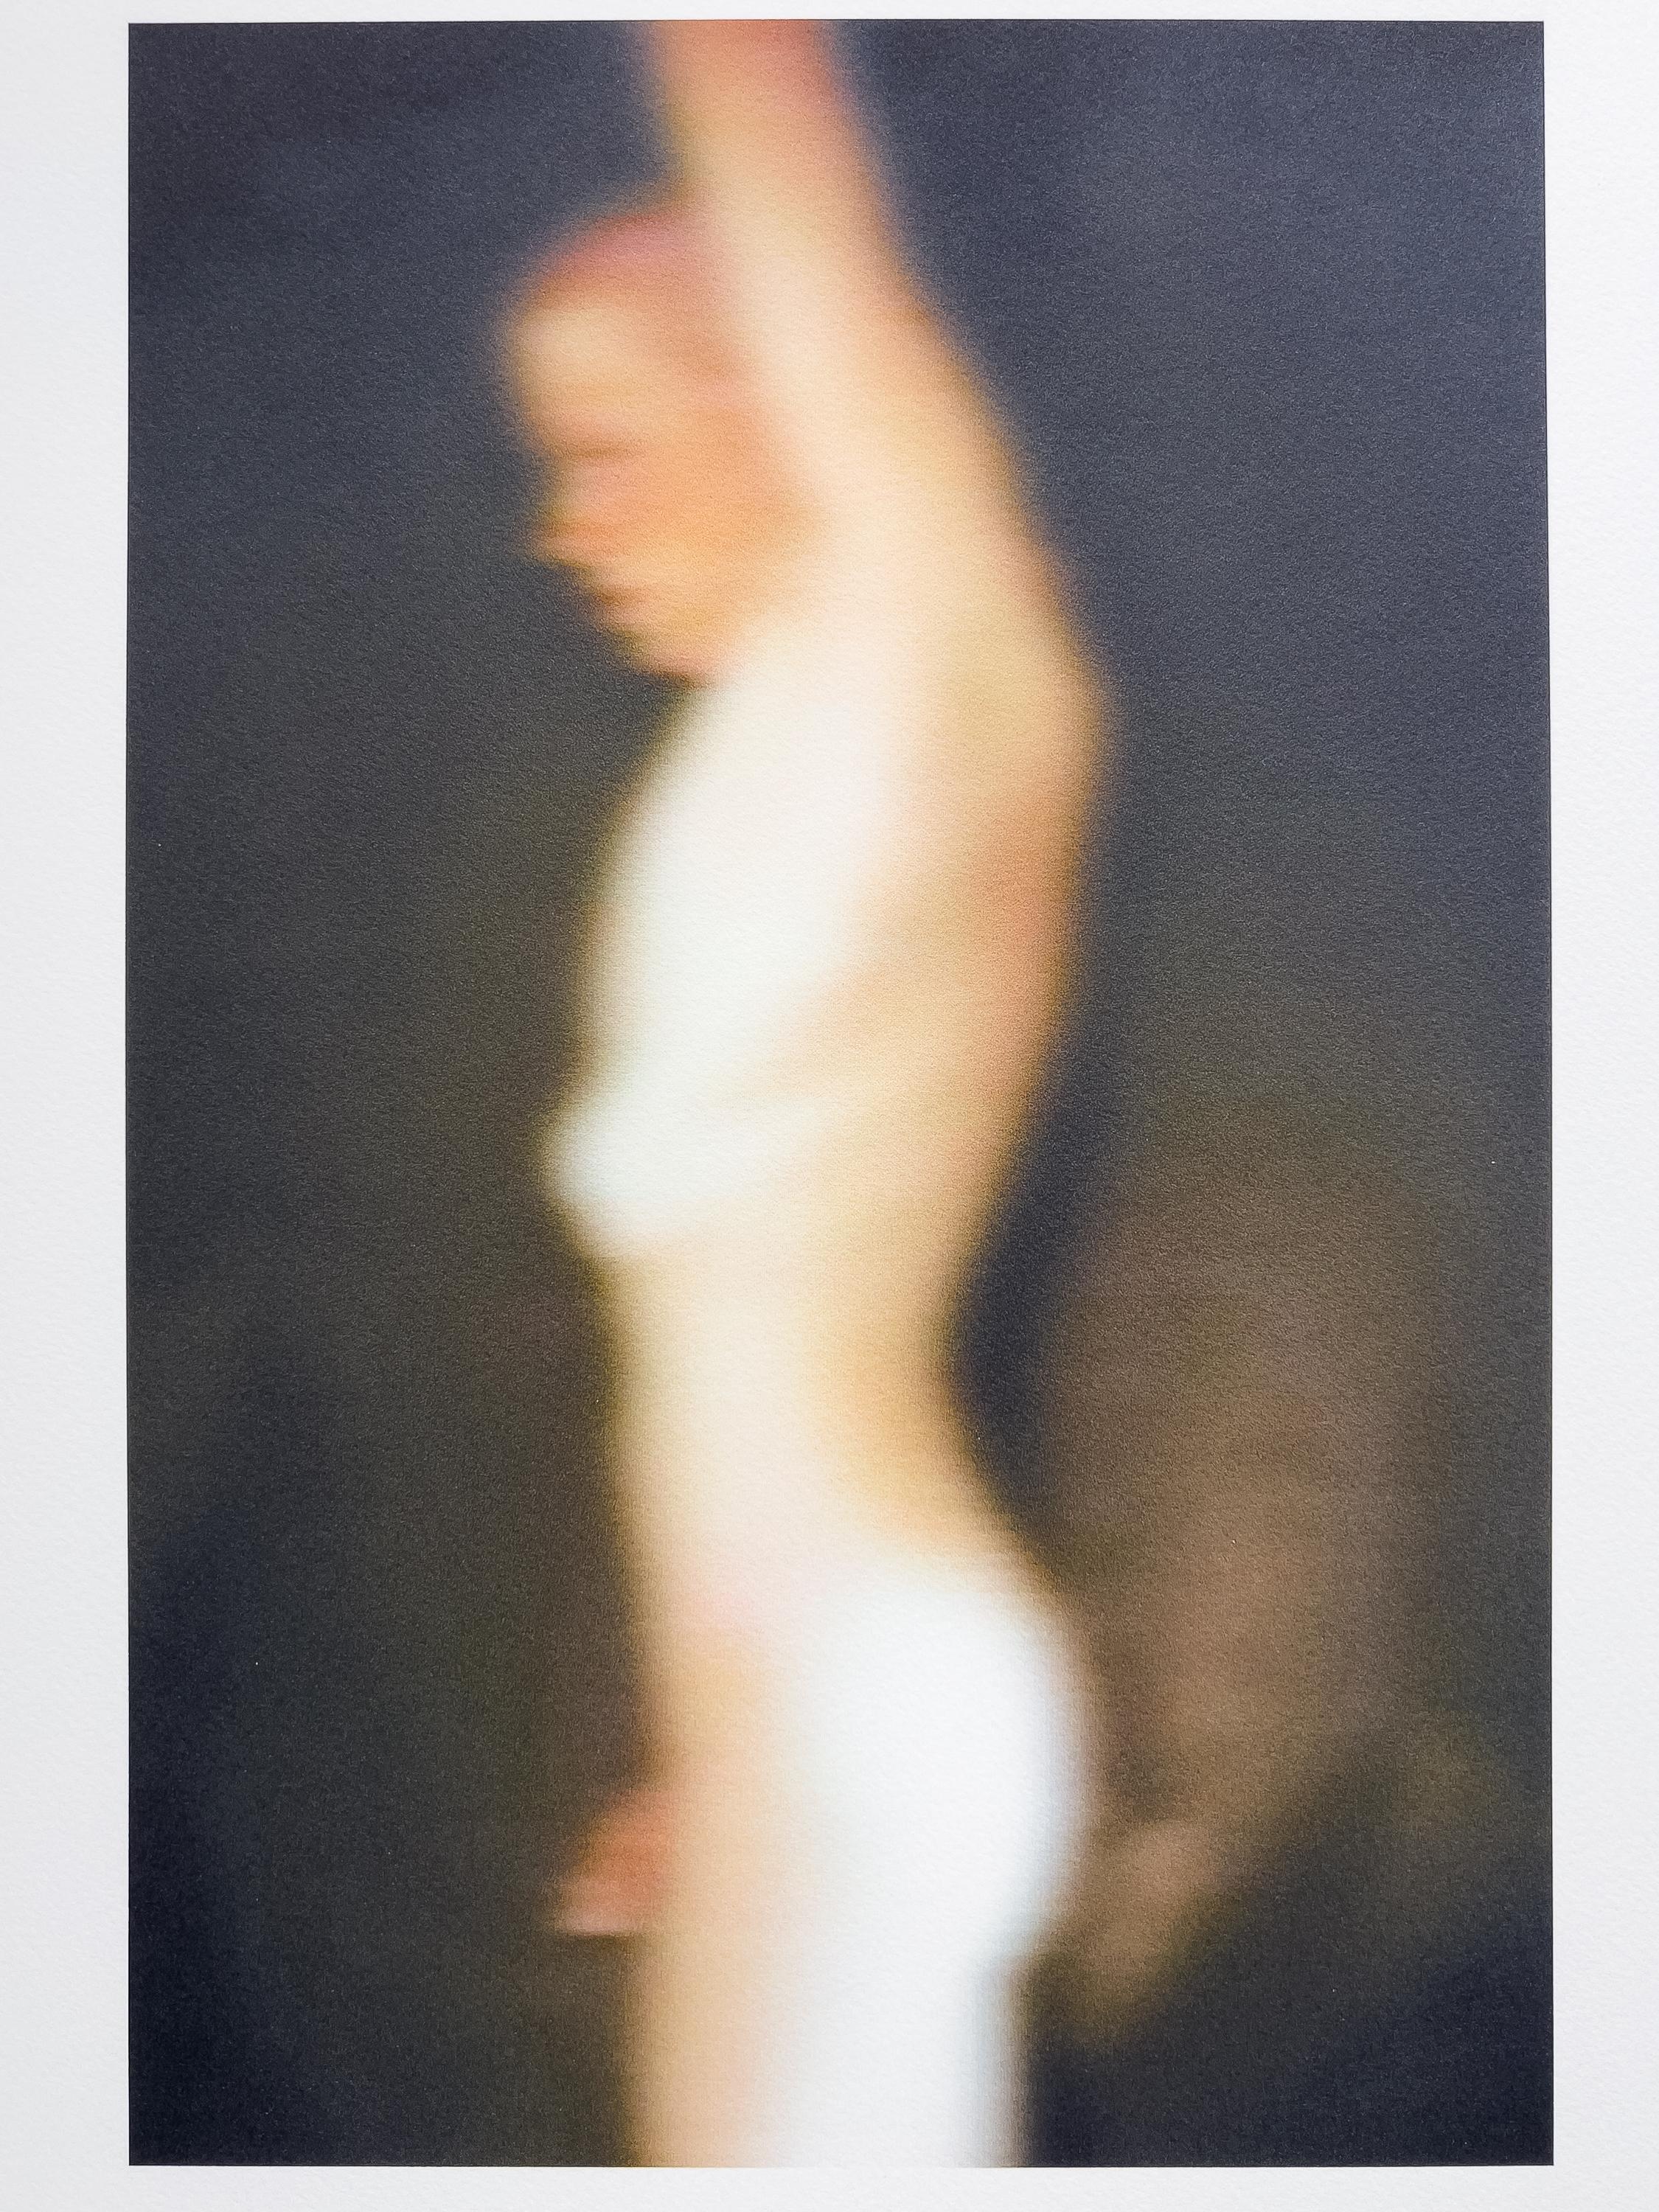 Thomas RUFF
(German, Born in 1958)

NUDES (Schellmann 96)
Executed in 2001
Edition 19/50. Signed and numbered
Iris Print on rag paper.
Image: 36.2 x 24 cm
Sheet: 75 x 60 cm

PROVENANCE
Public Sale: SBI Art Auction, Tokyo, Japan
Private Collection